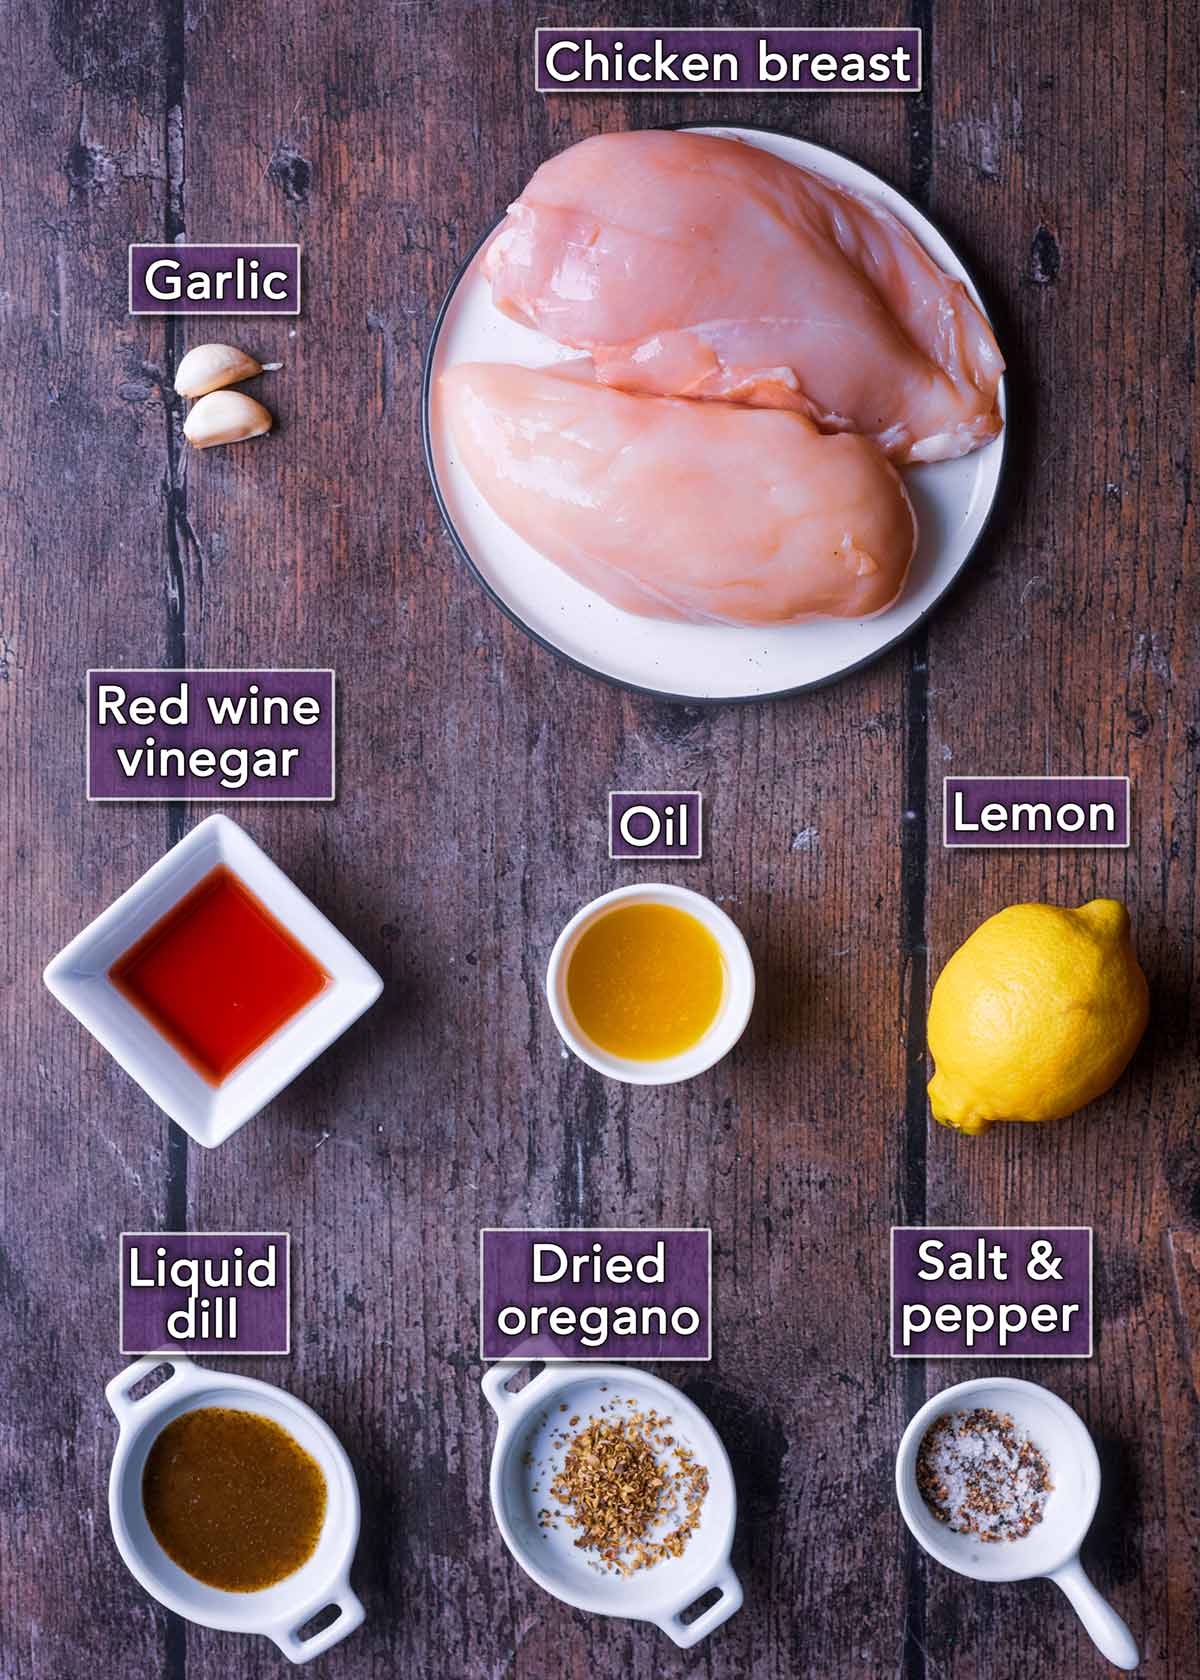 All the ingredients needed to make this recipe each with a ext overlay label.